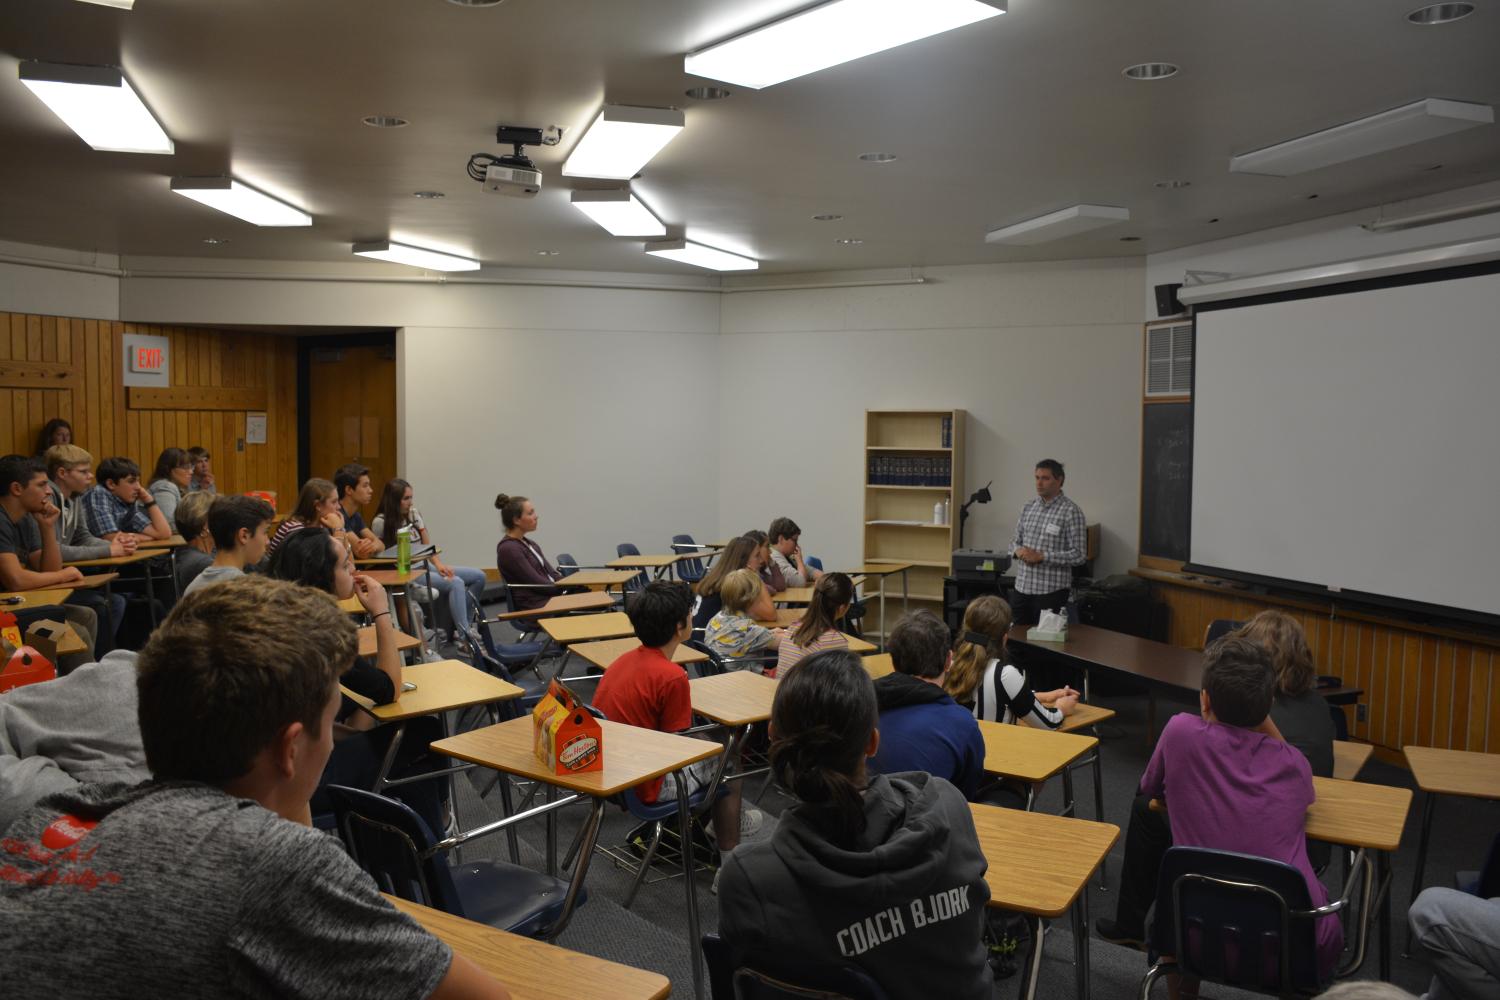 Matt Hancher talked to students about his work at Google and NASA, and answered various questions.